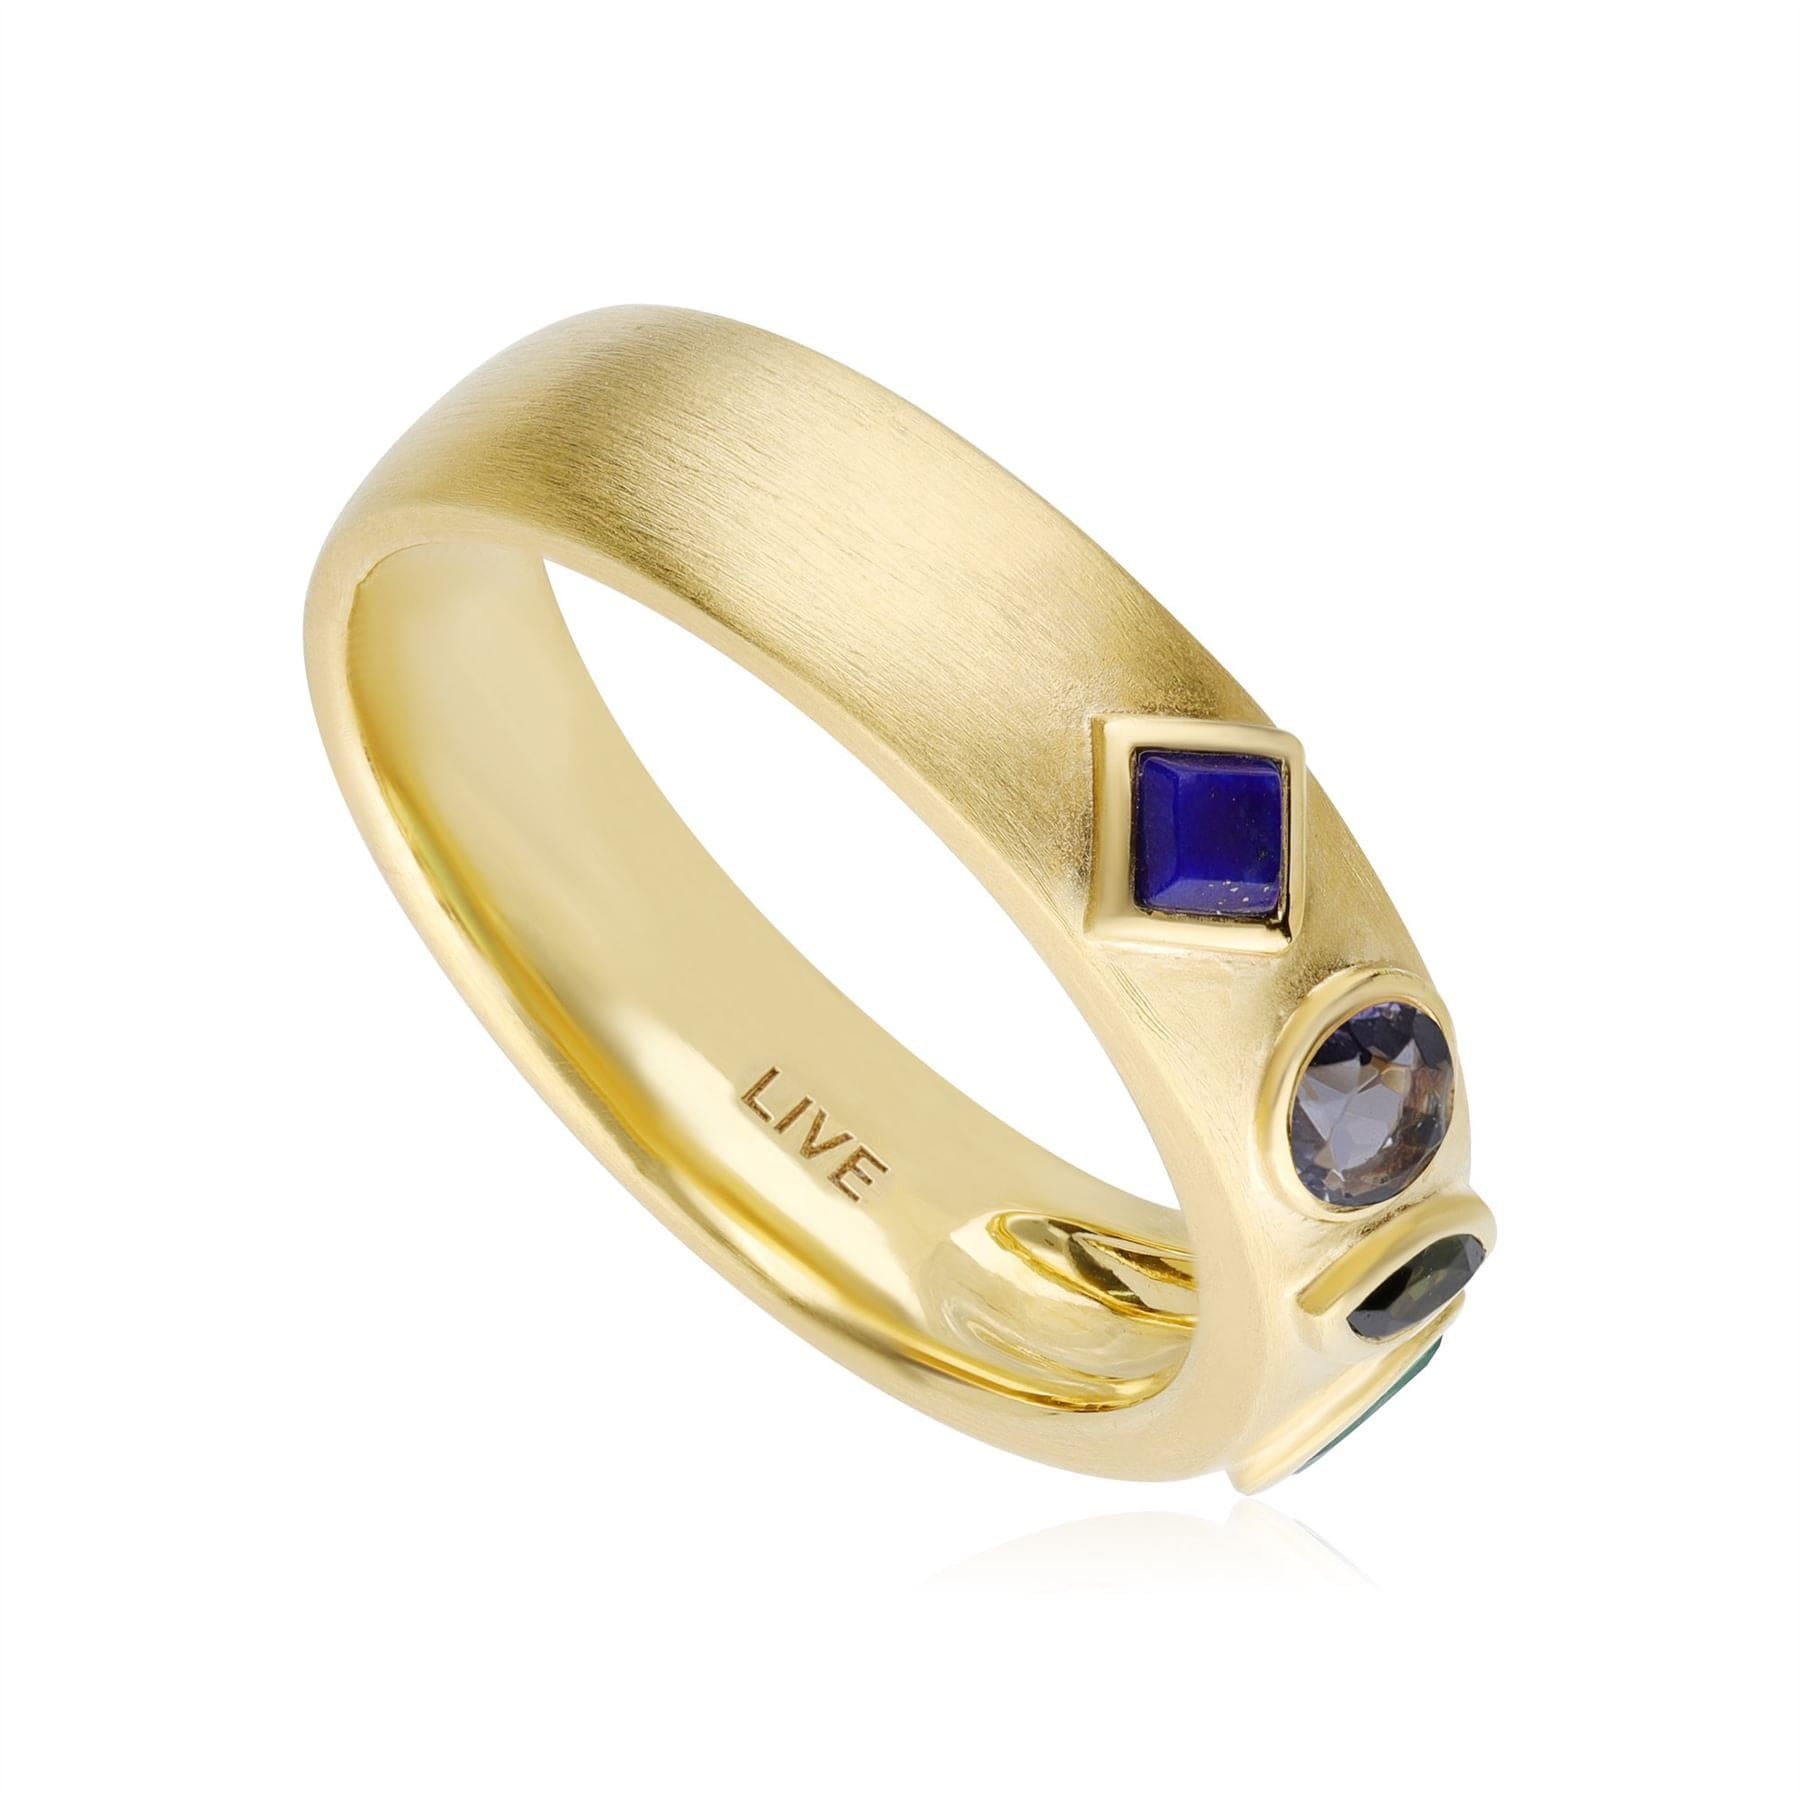 133R9634019 Coded Whispers Brushed Gold 'Live' Acrostic Gemstone Ring 6